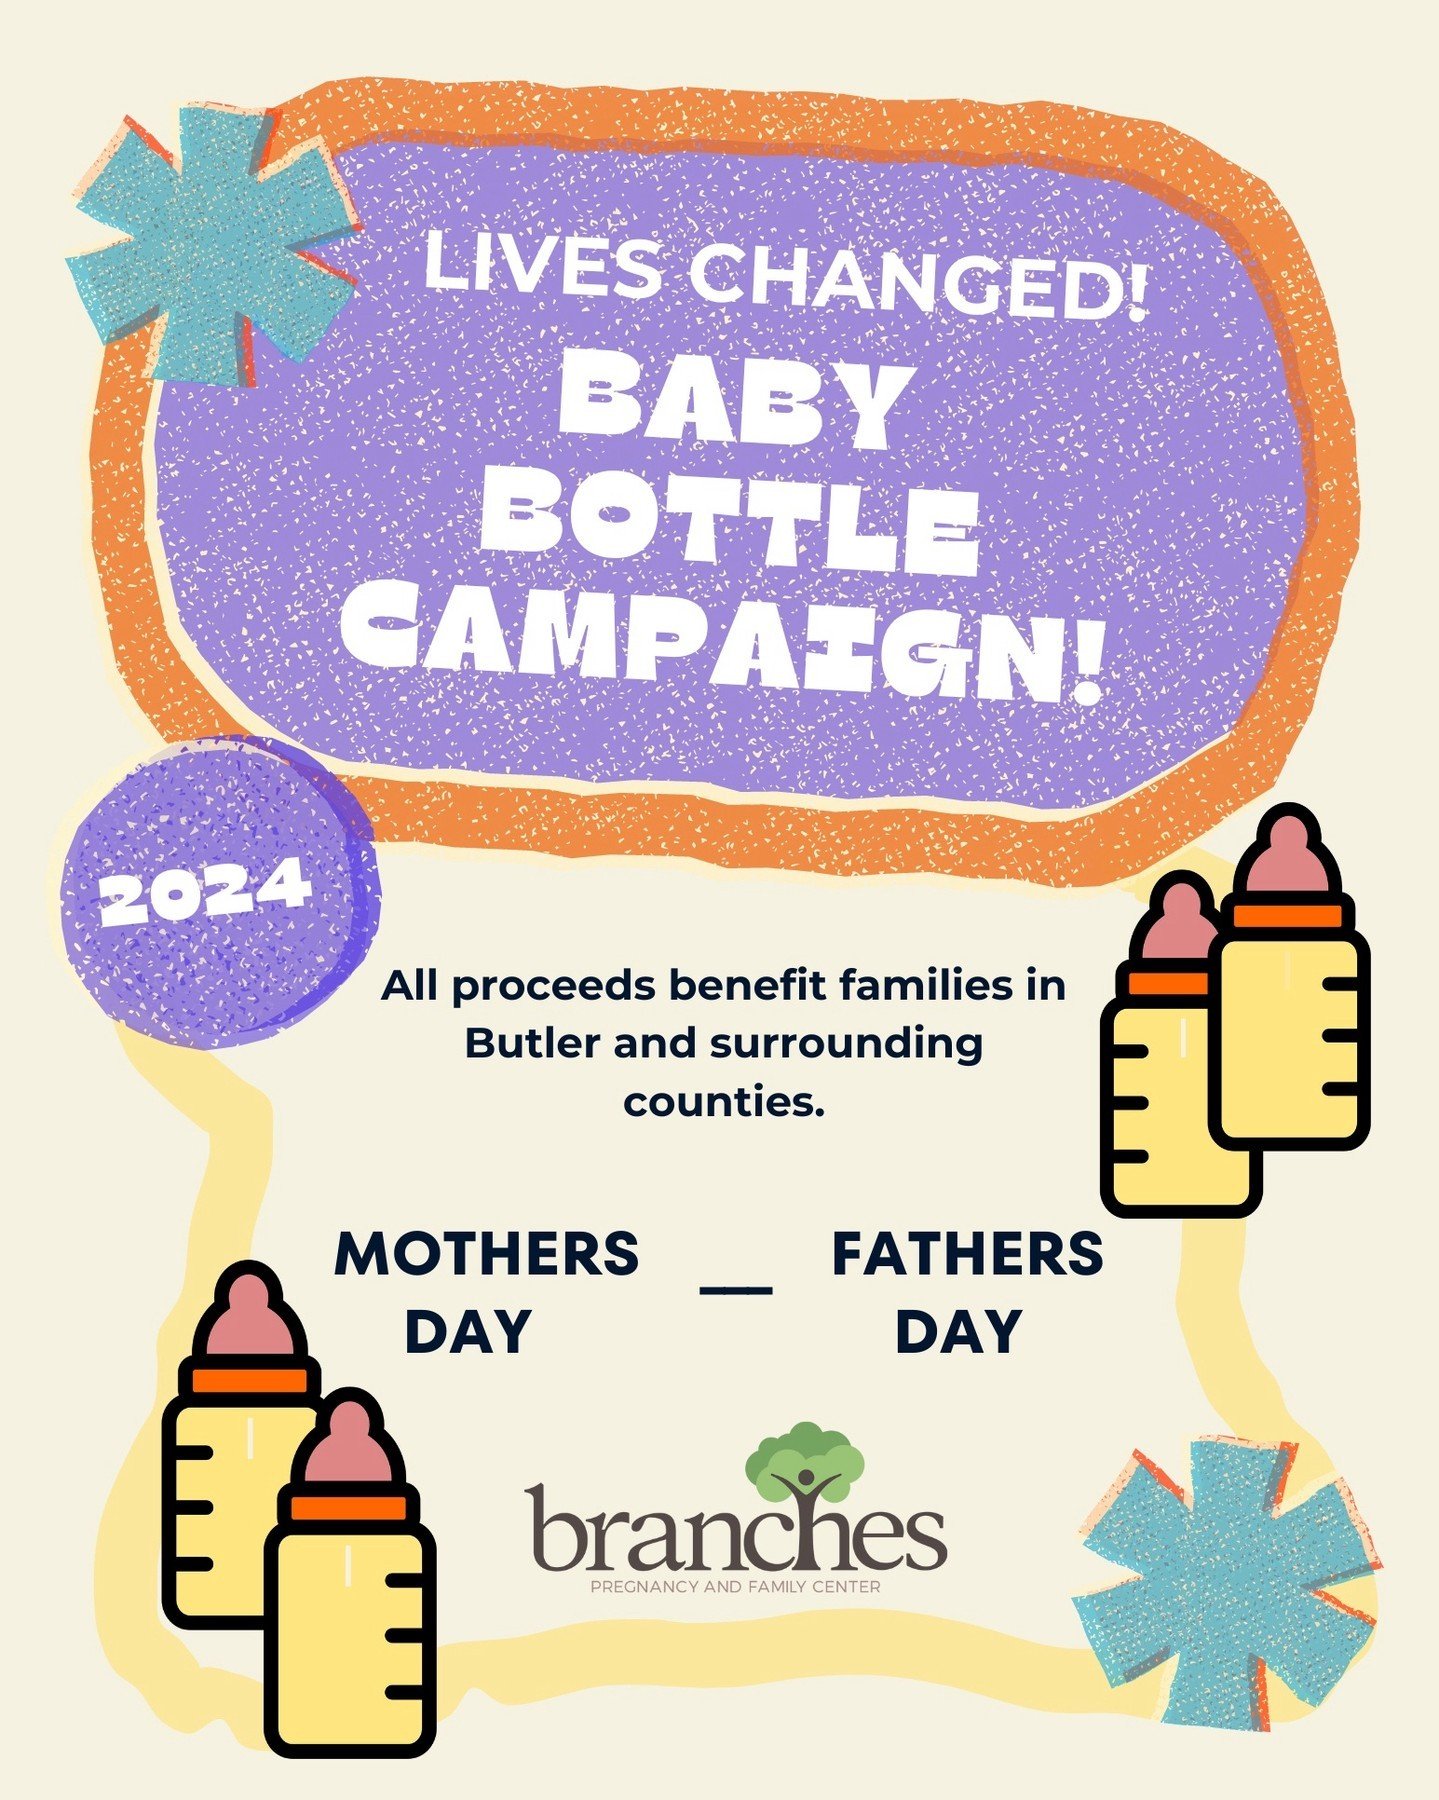 Branches Pregnancy &amp; Family Center will be collecting change between Mother&rsquo;s Day &amp; Father&rsquo;s Day.  Pick up a bottle from the table in the foyer on Mother&rsquo;s Day, fill it up with change and return by Father&rsquo;s Day.  All p